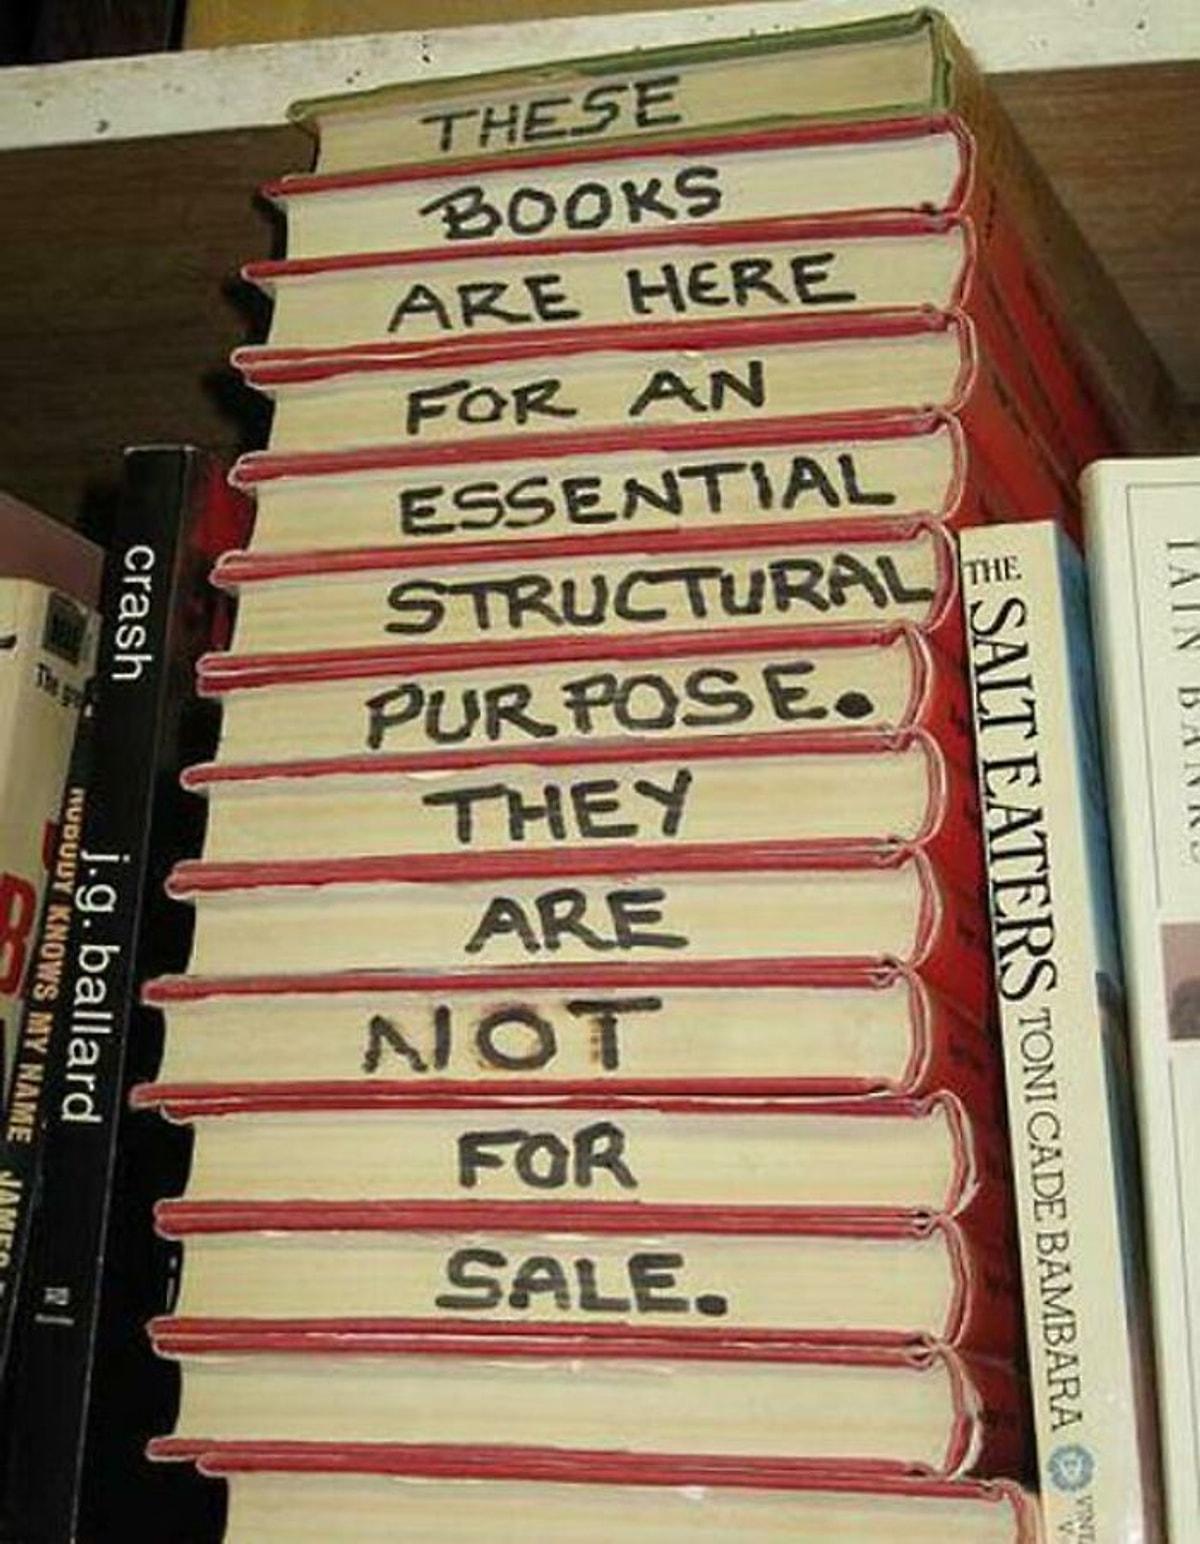 Of those books is yours